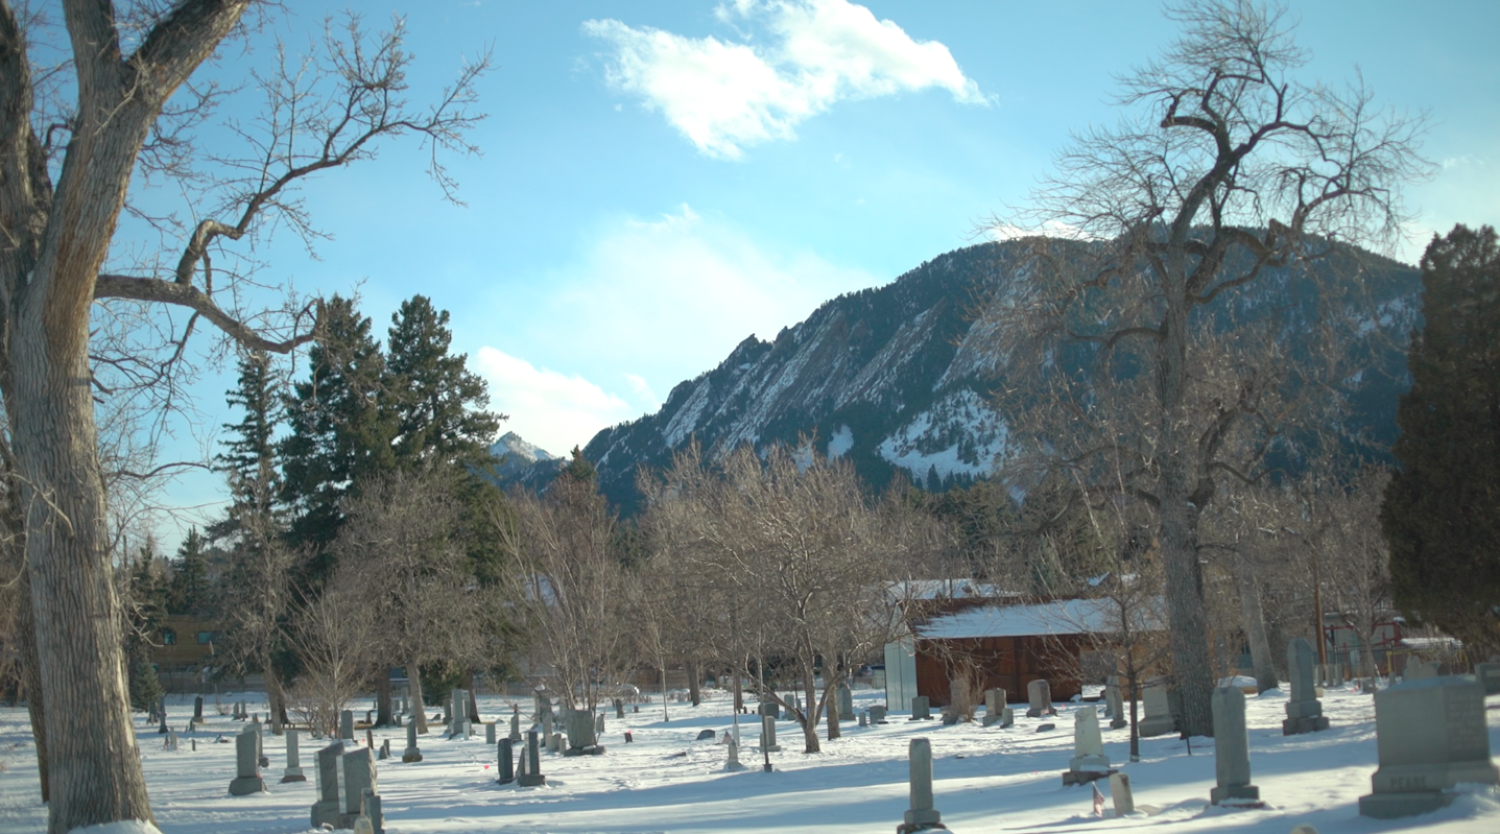 Cemetery in winter with the flat irons in the background